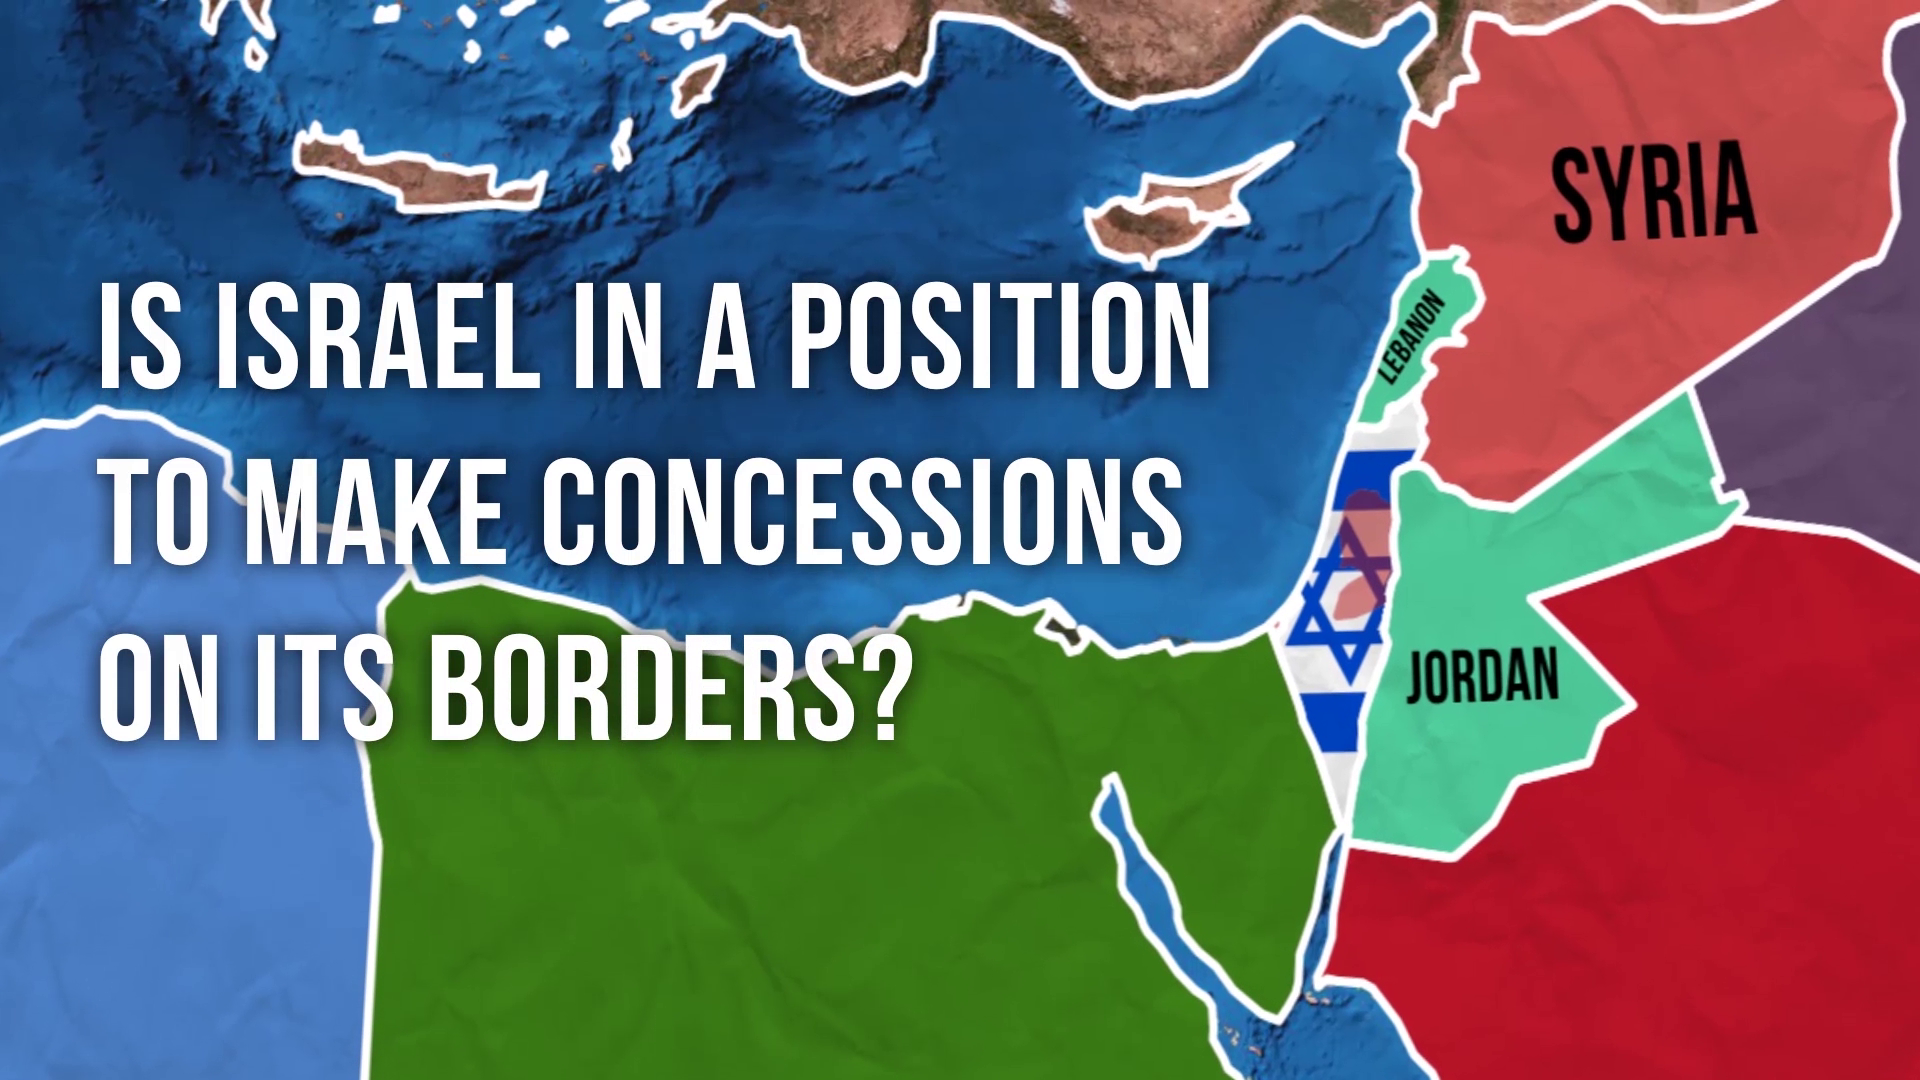 Is Israel in a position to make concessions on its' borders?